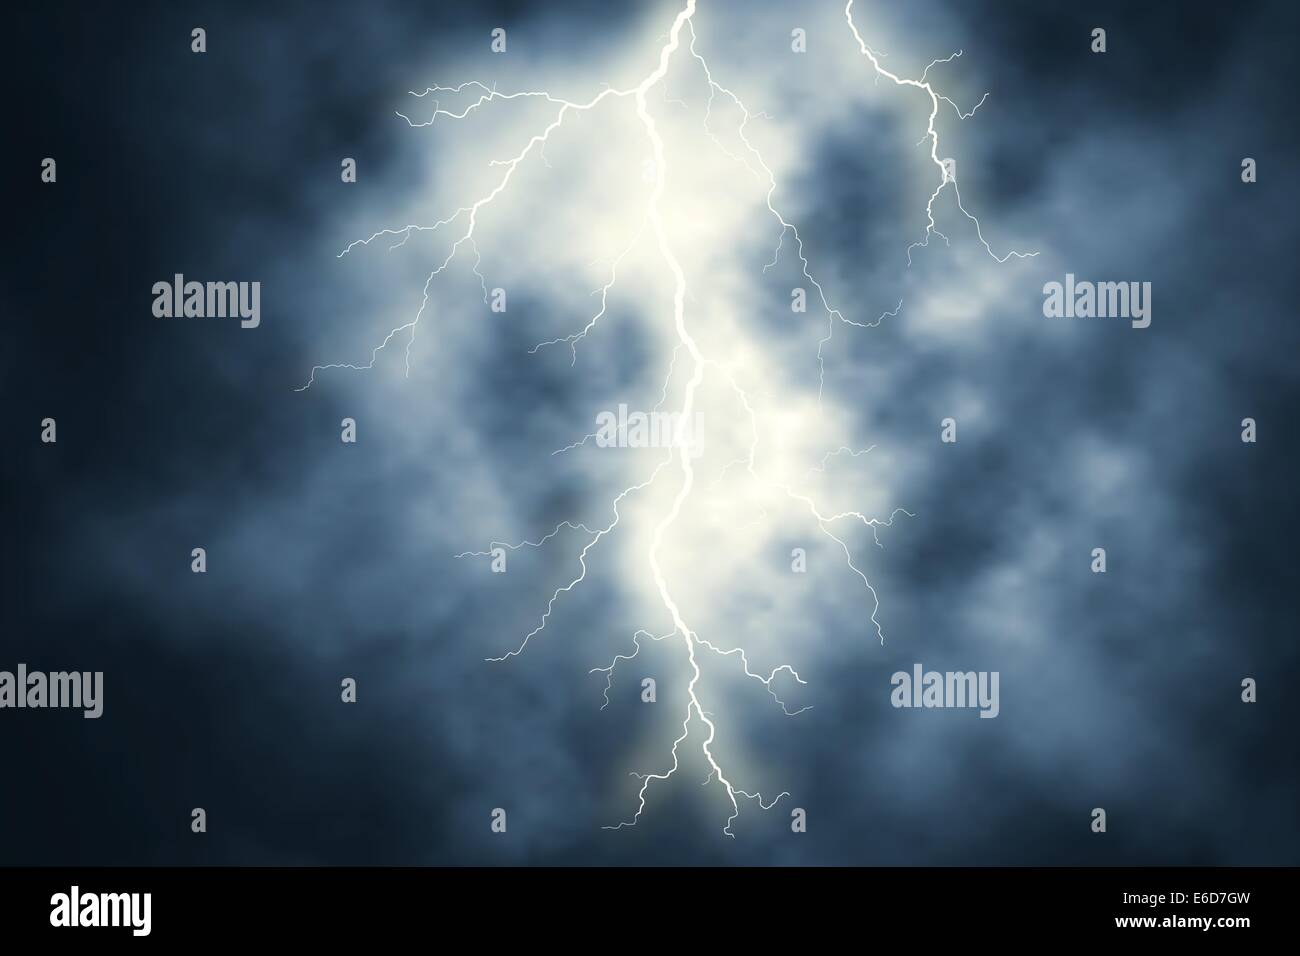 Editable vector illustration of a lightning bolt at night with background sky made using gradient meshes Stock Vector